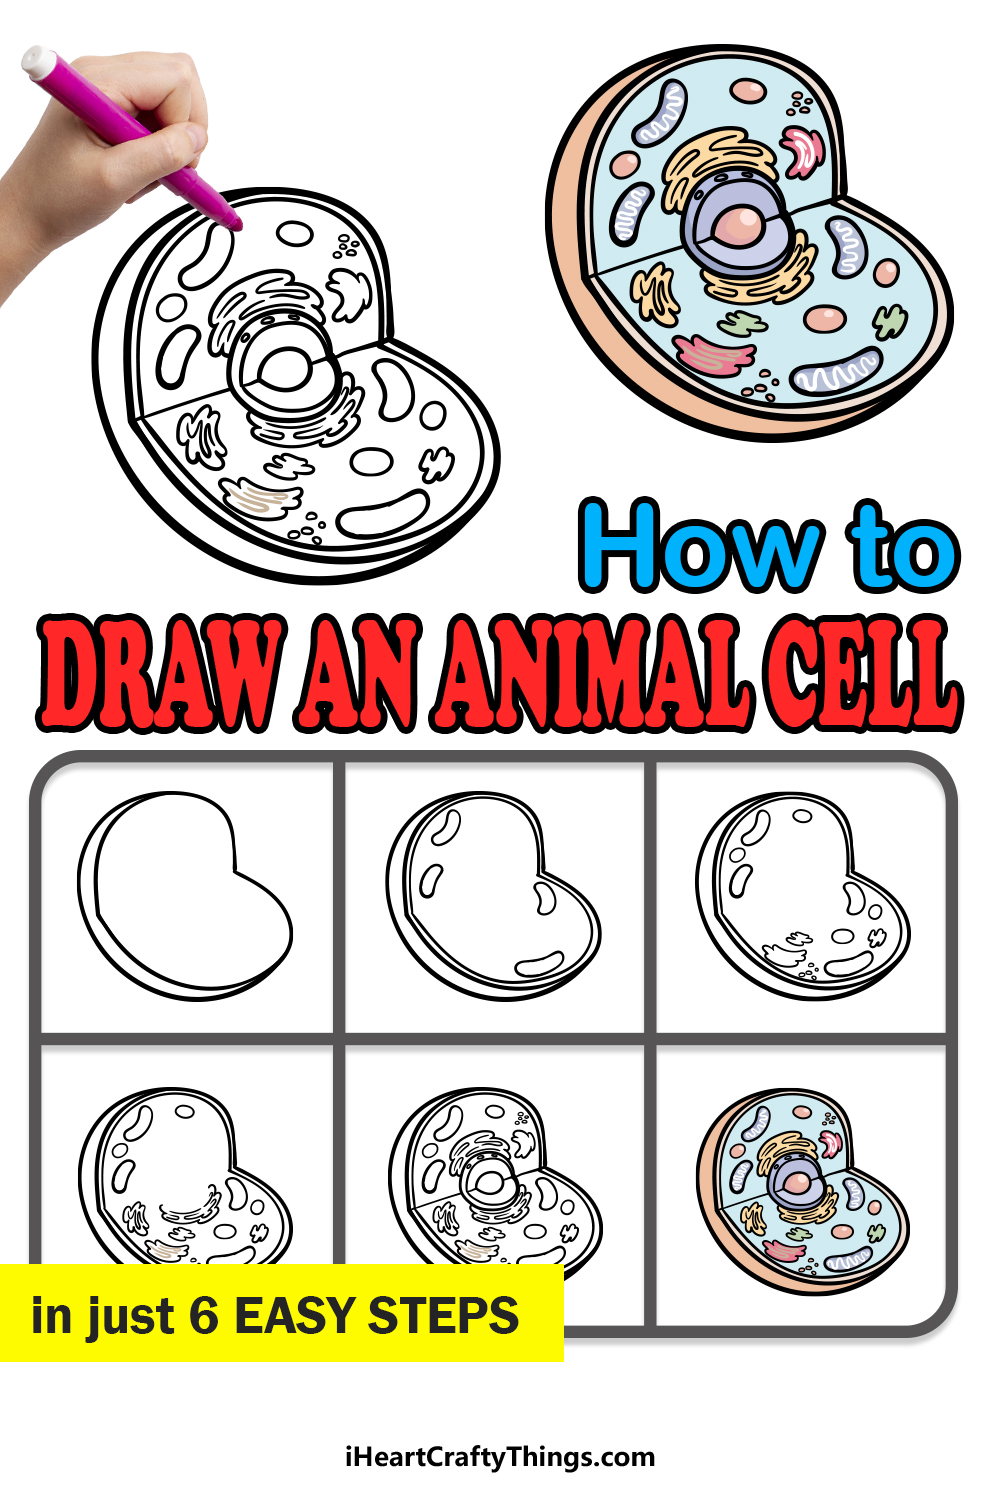 how to draw an animal cell in 6 easy steps